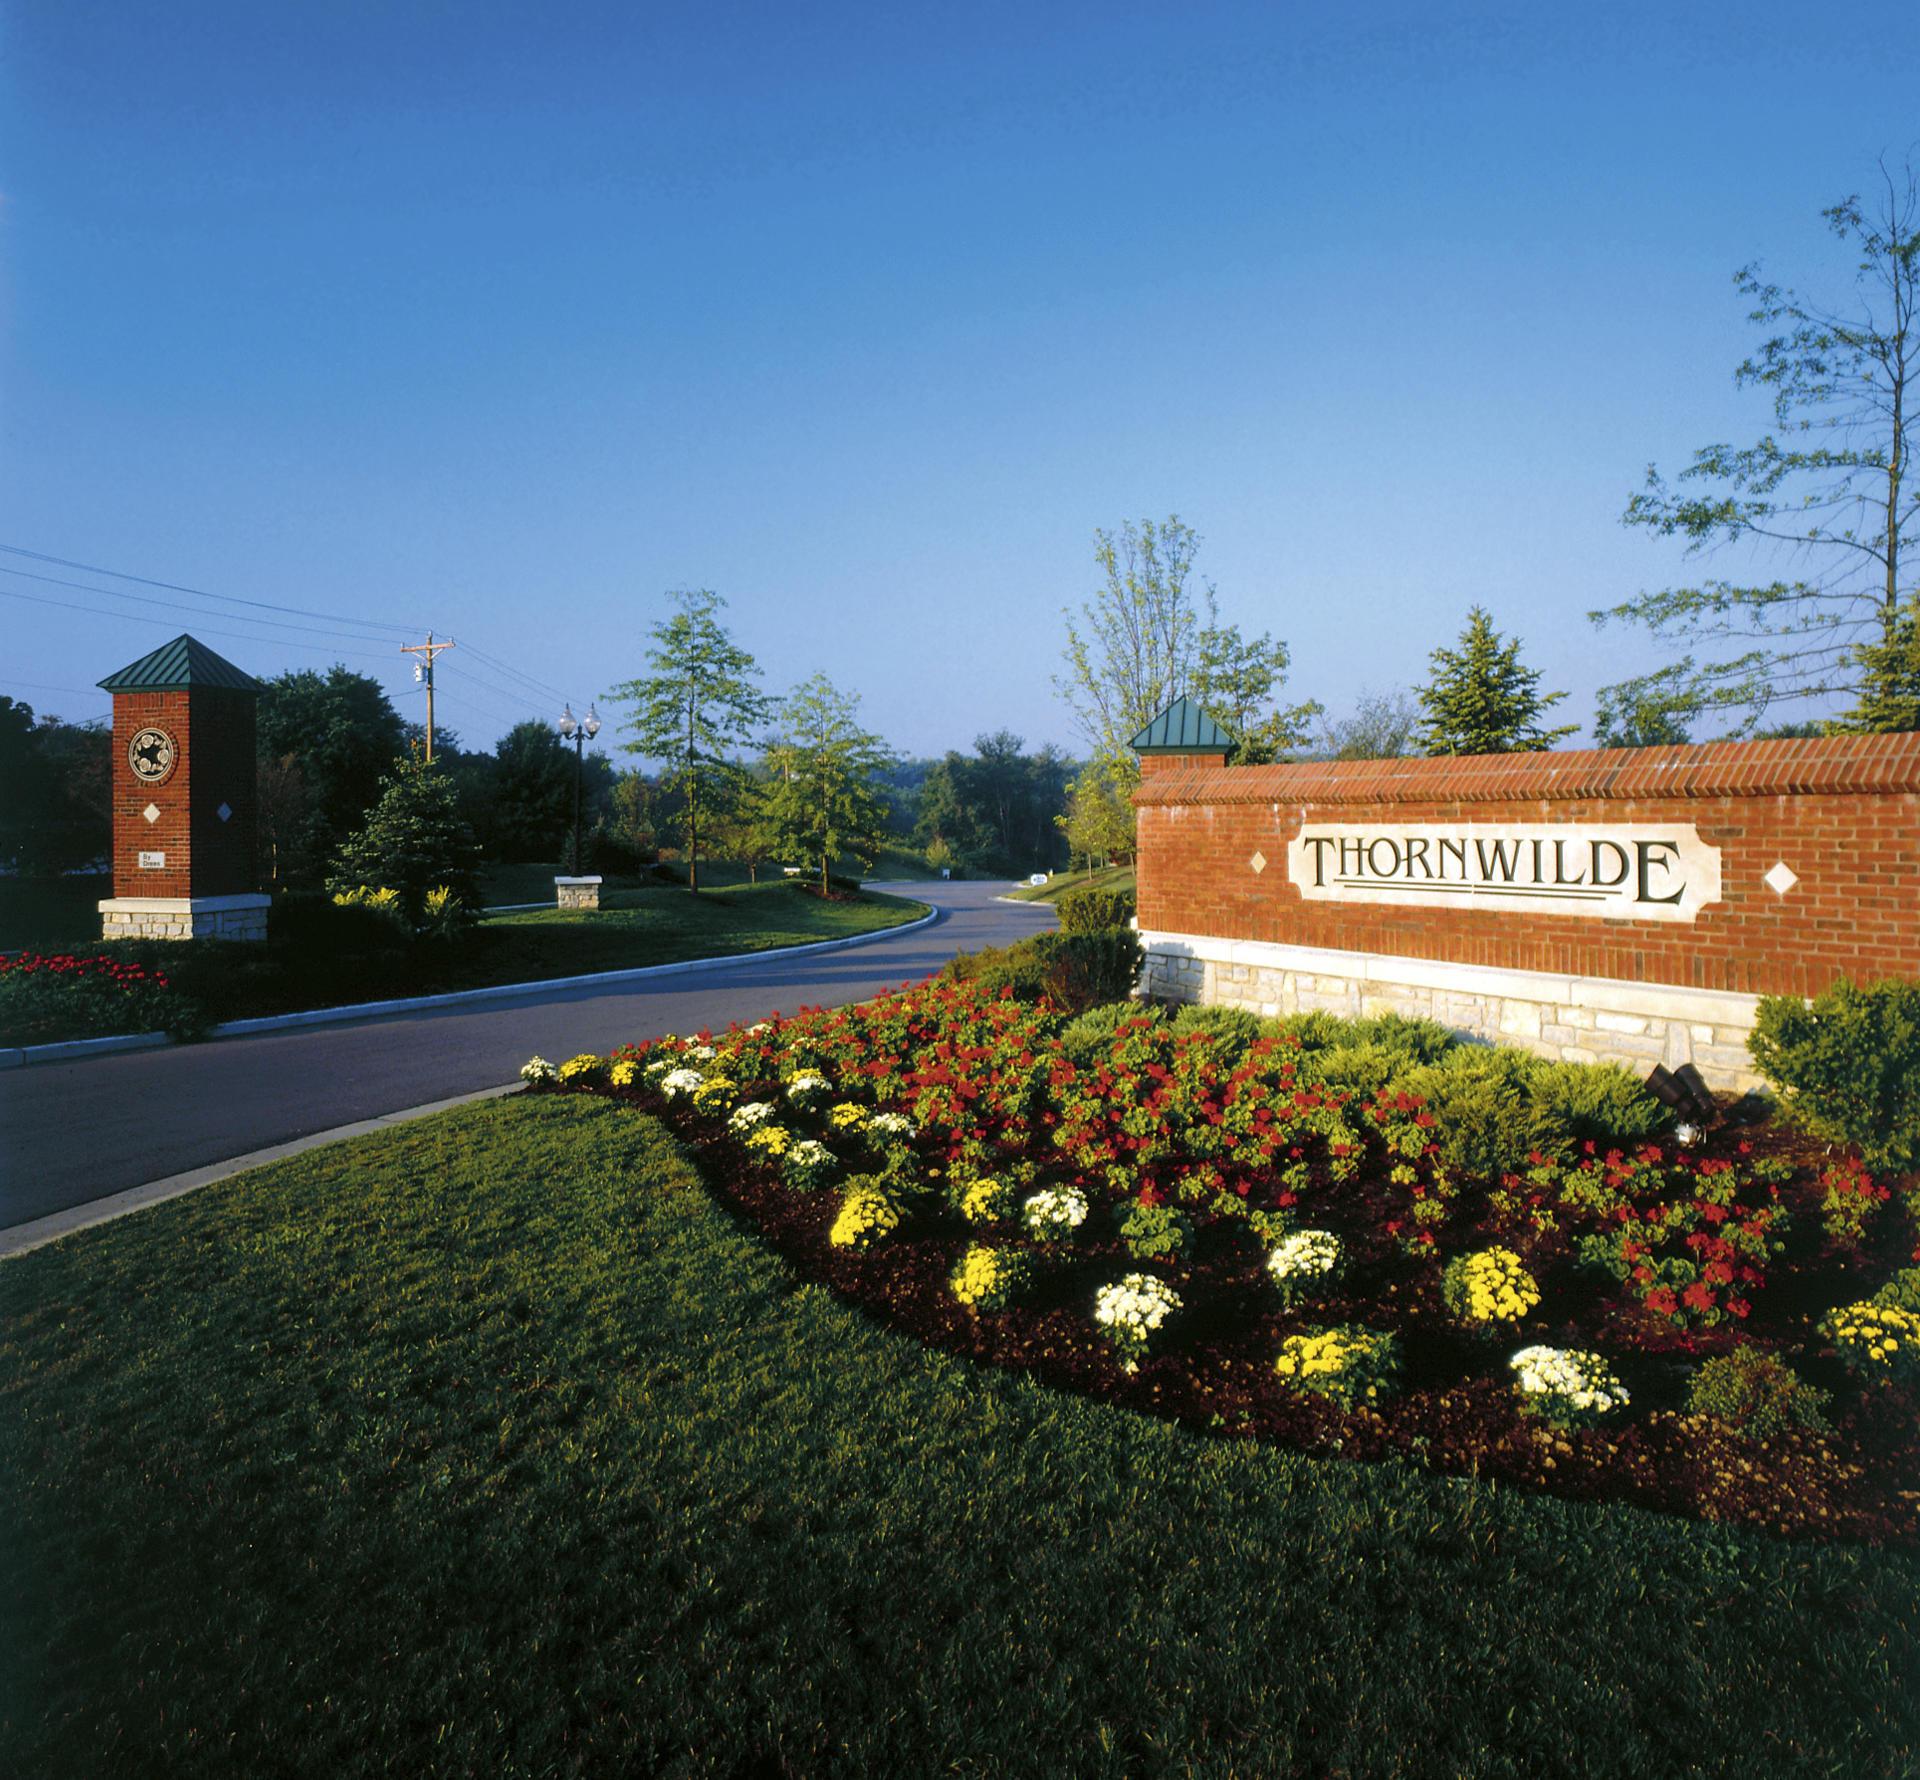 The Thornwilde Entrance